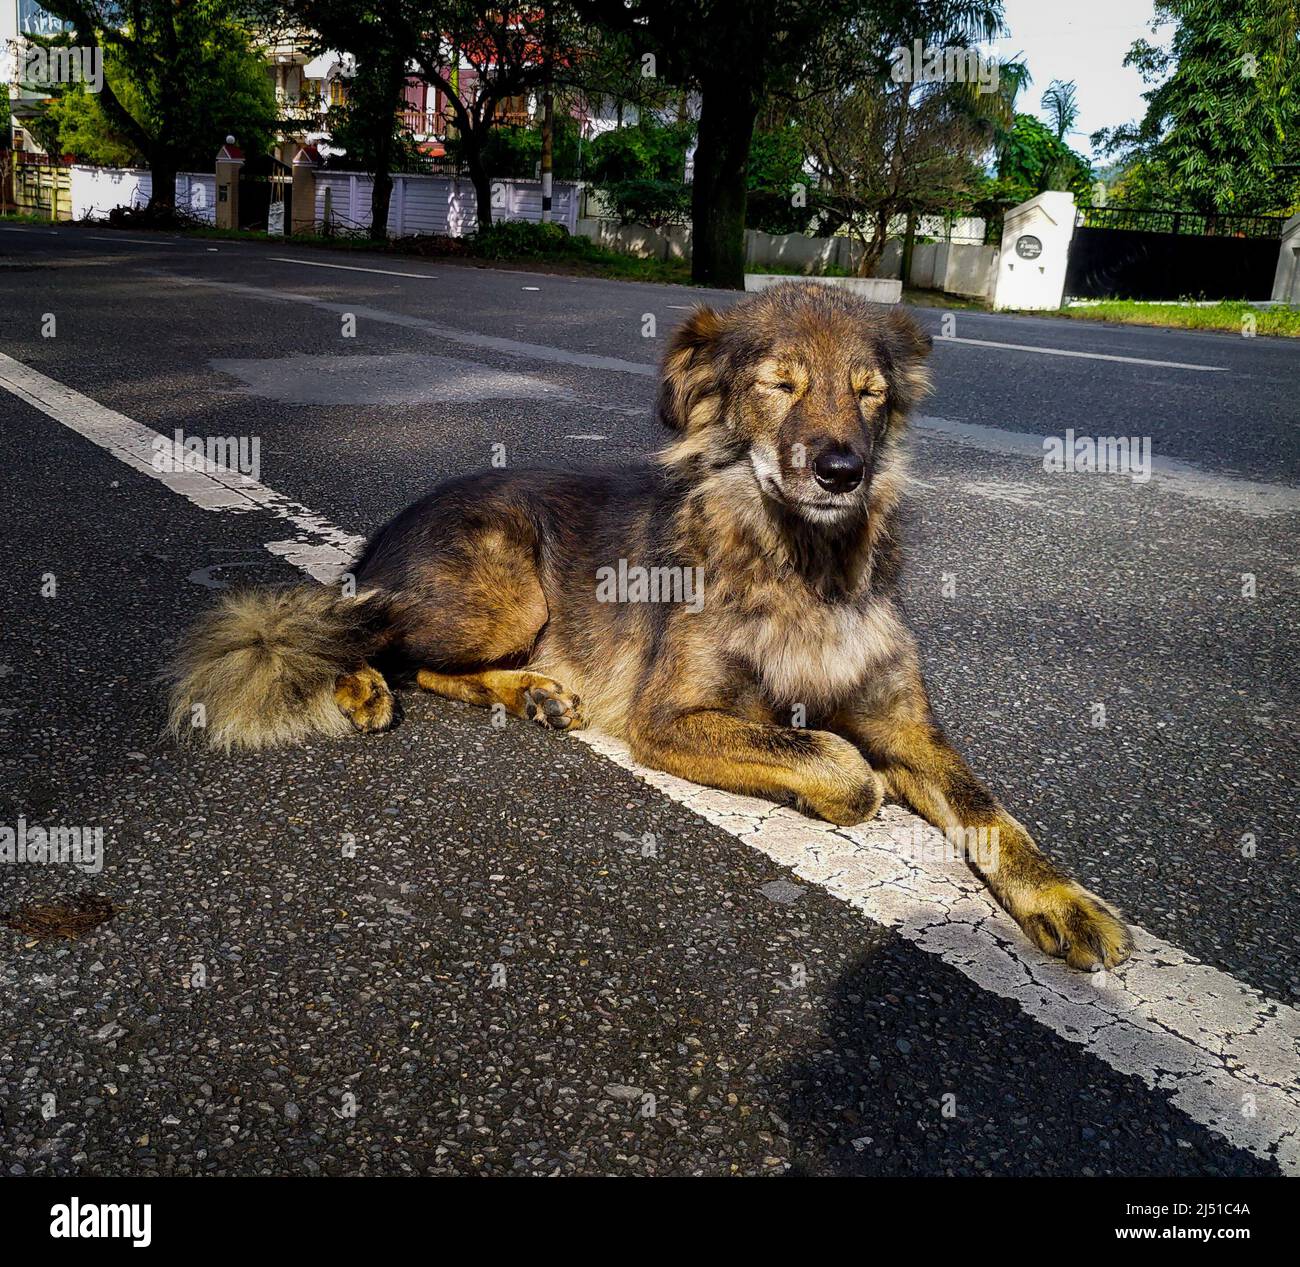 A close-up shot of a dark brown street dog resting in a meditative position in India. Stock Photo